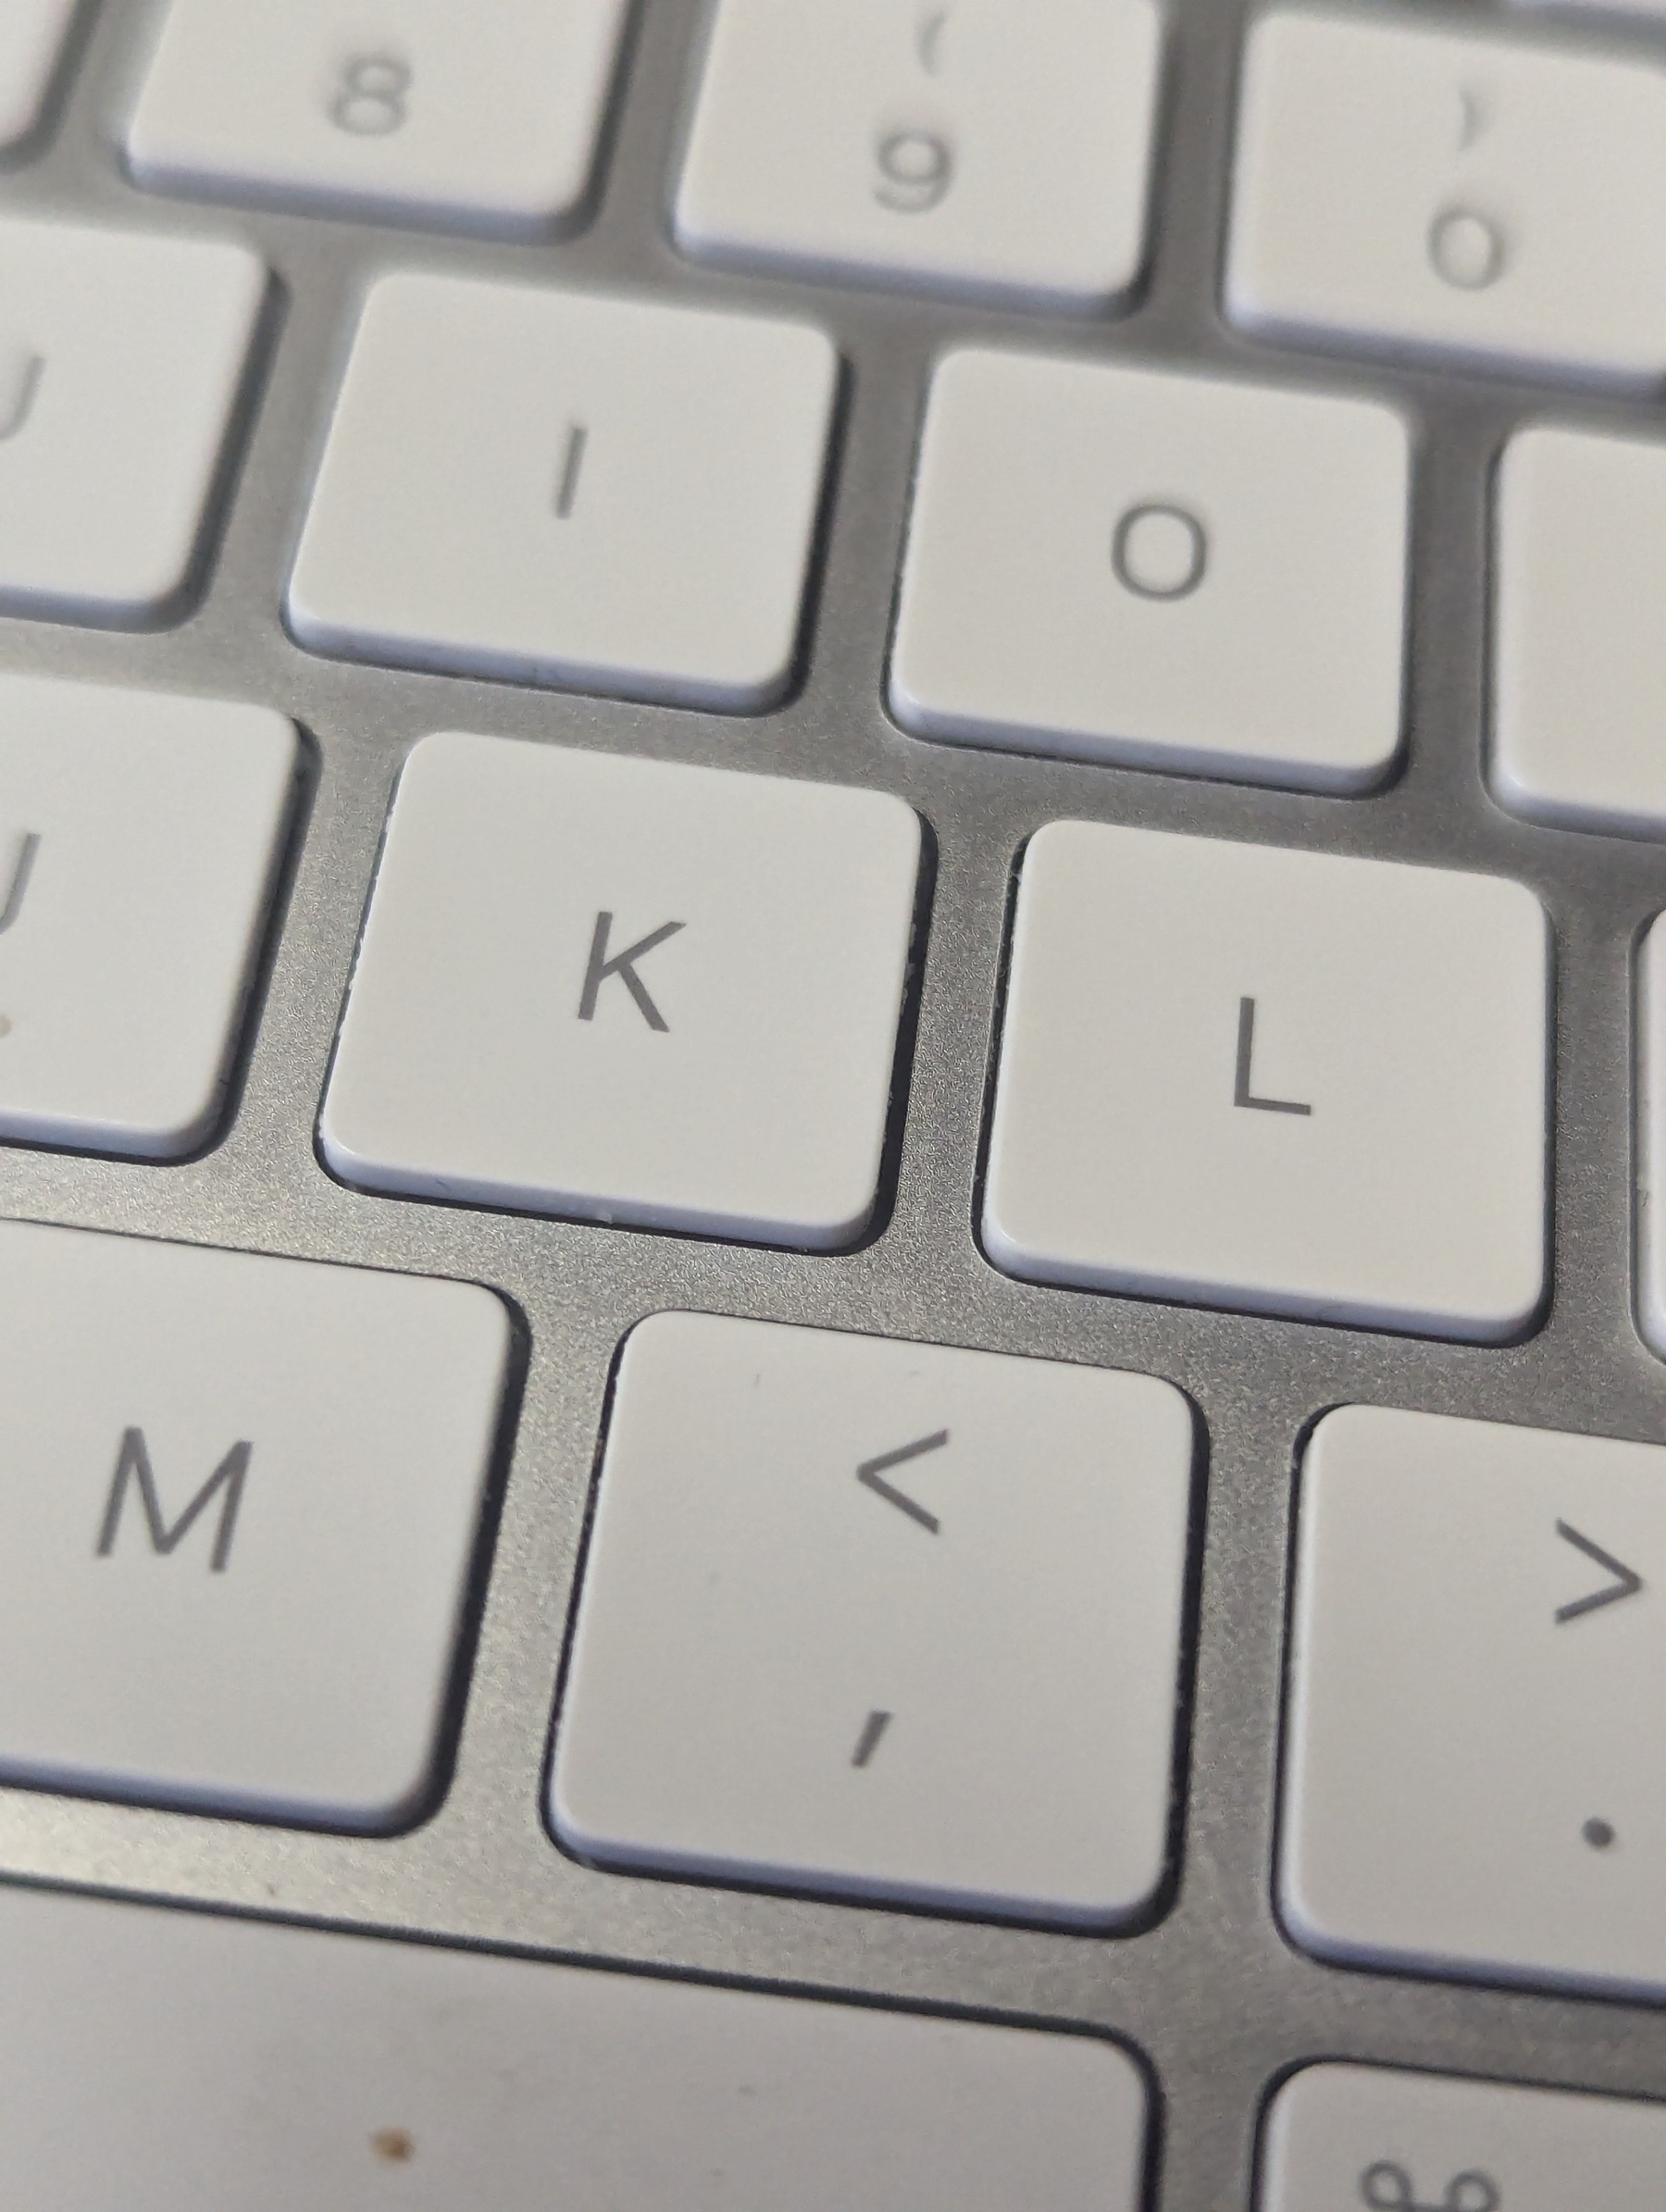 Photo of the Apple magic keyboard with focus on K, L, and M.